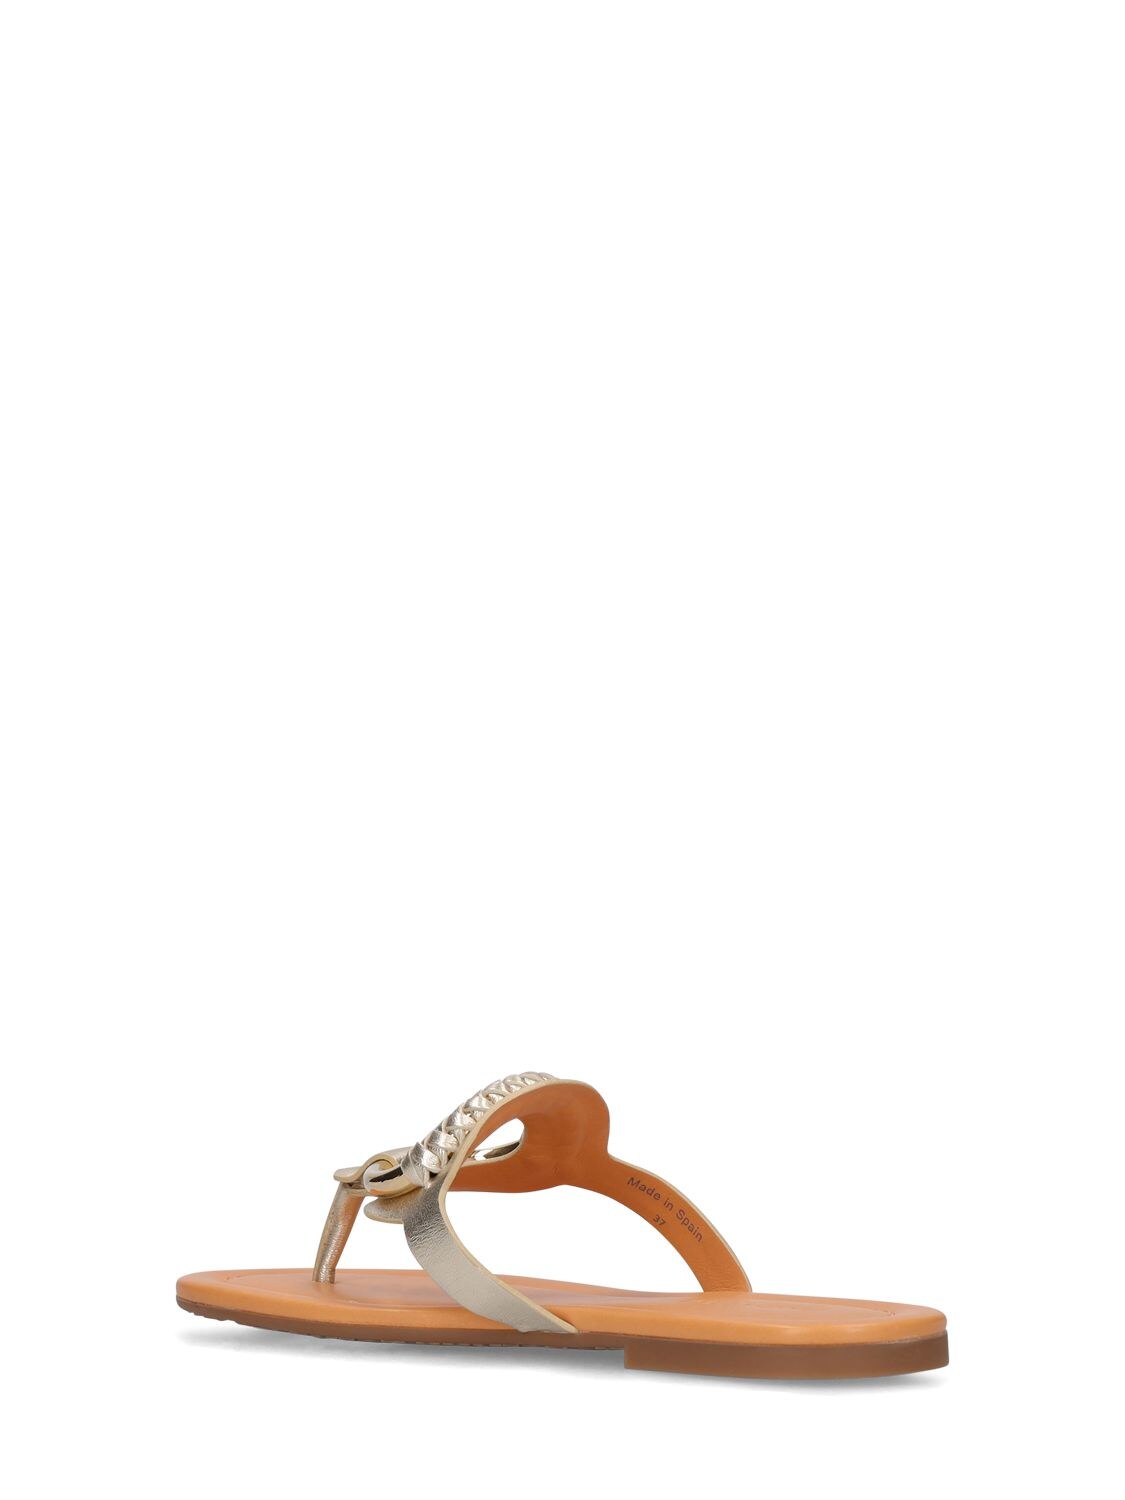 Shop See By Chloé 10mm Hana Leather Sandals In Light Gold